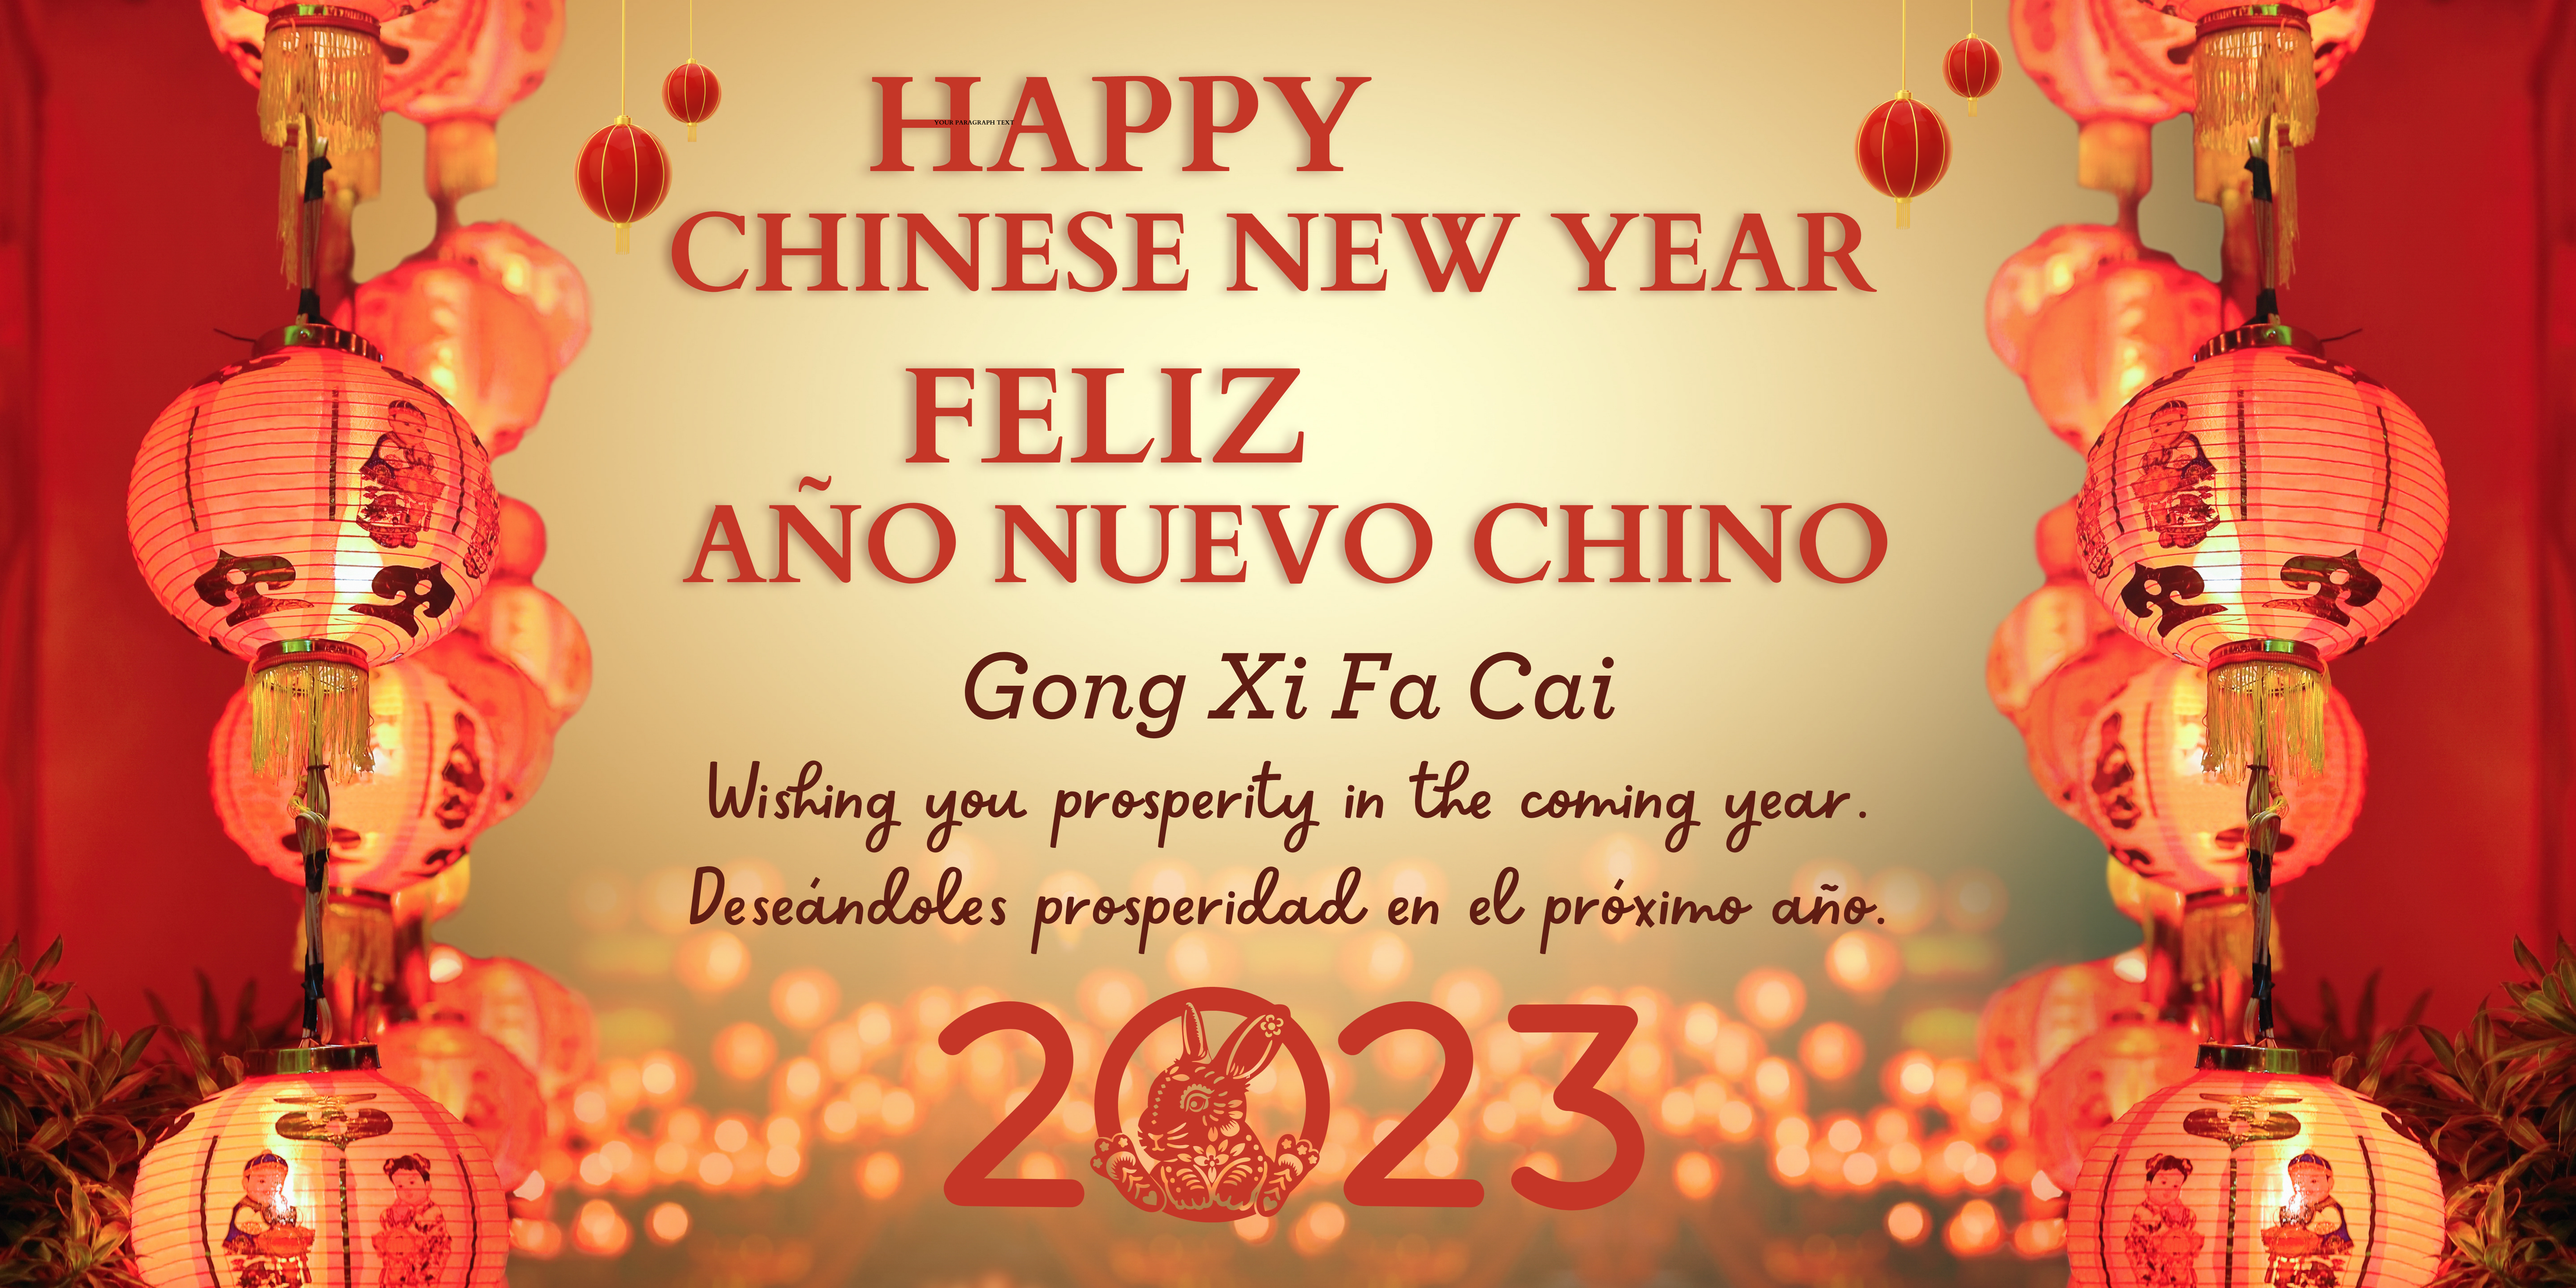 Red text on gold background with a border of red Chinese lanterns. Text says, "Happy Chinese New Year" and "Feliz Año Nuevo Chino." Additional text says, " Gong Xi Fa Cai" and "Wishing you prosperity in the coming year" and "Deseándoles prosperidad en el próximo año."